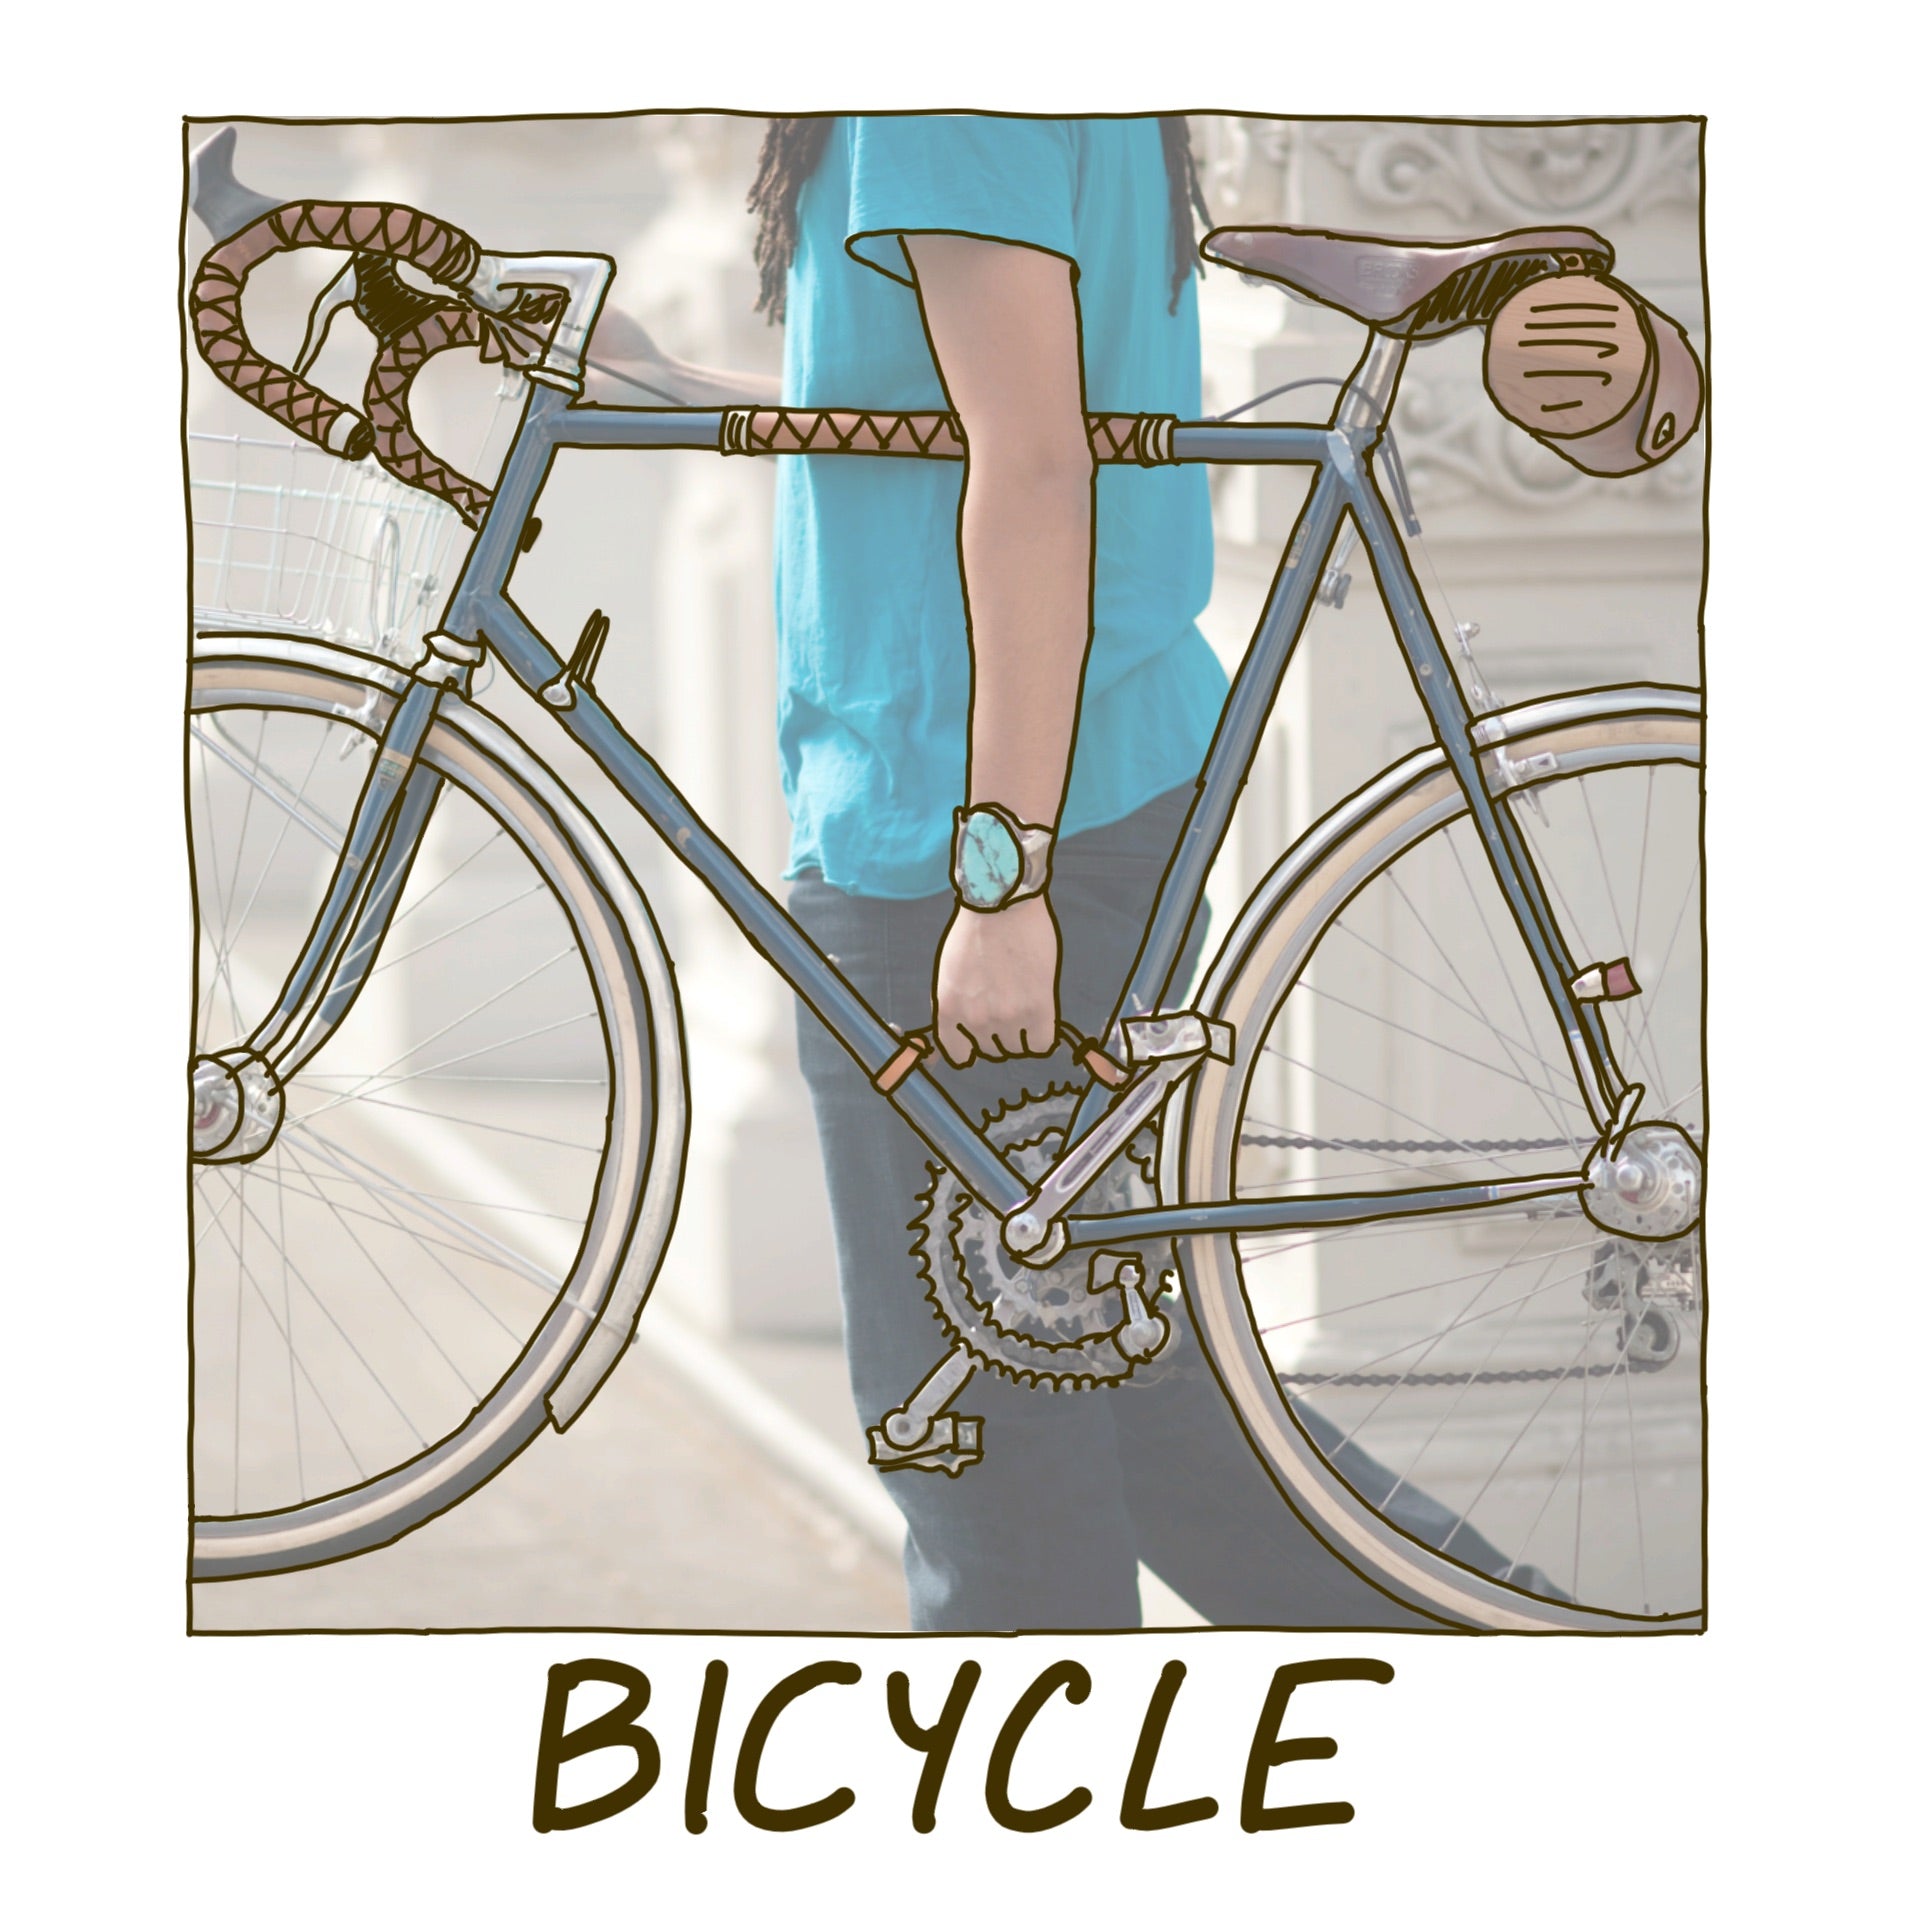 A man wearing a turquoise bracelet and shirt reaching down and carrying a bicycle with a honey leather bicycle frame handle, with the word "Bicycle" underneath